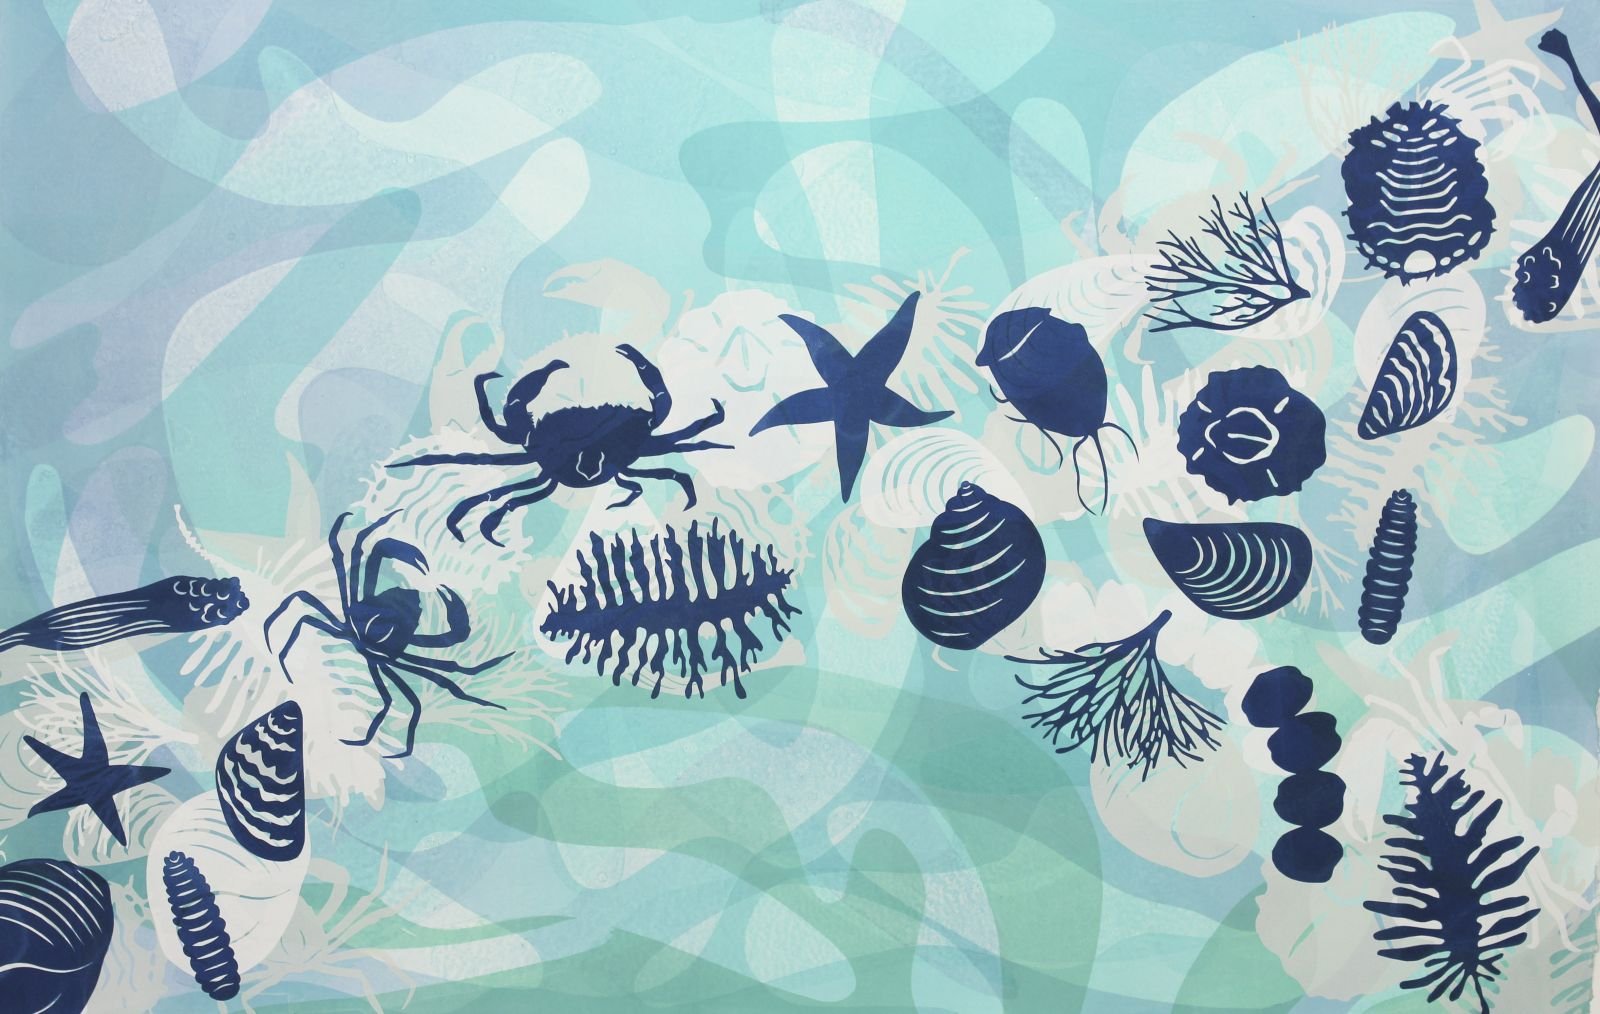 Deep blue and warm gray silhouettes of marine invertebrate plankton appear to be carried in a current against a background of organic papercut shapes in watery pale blues and greens.